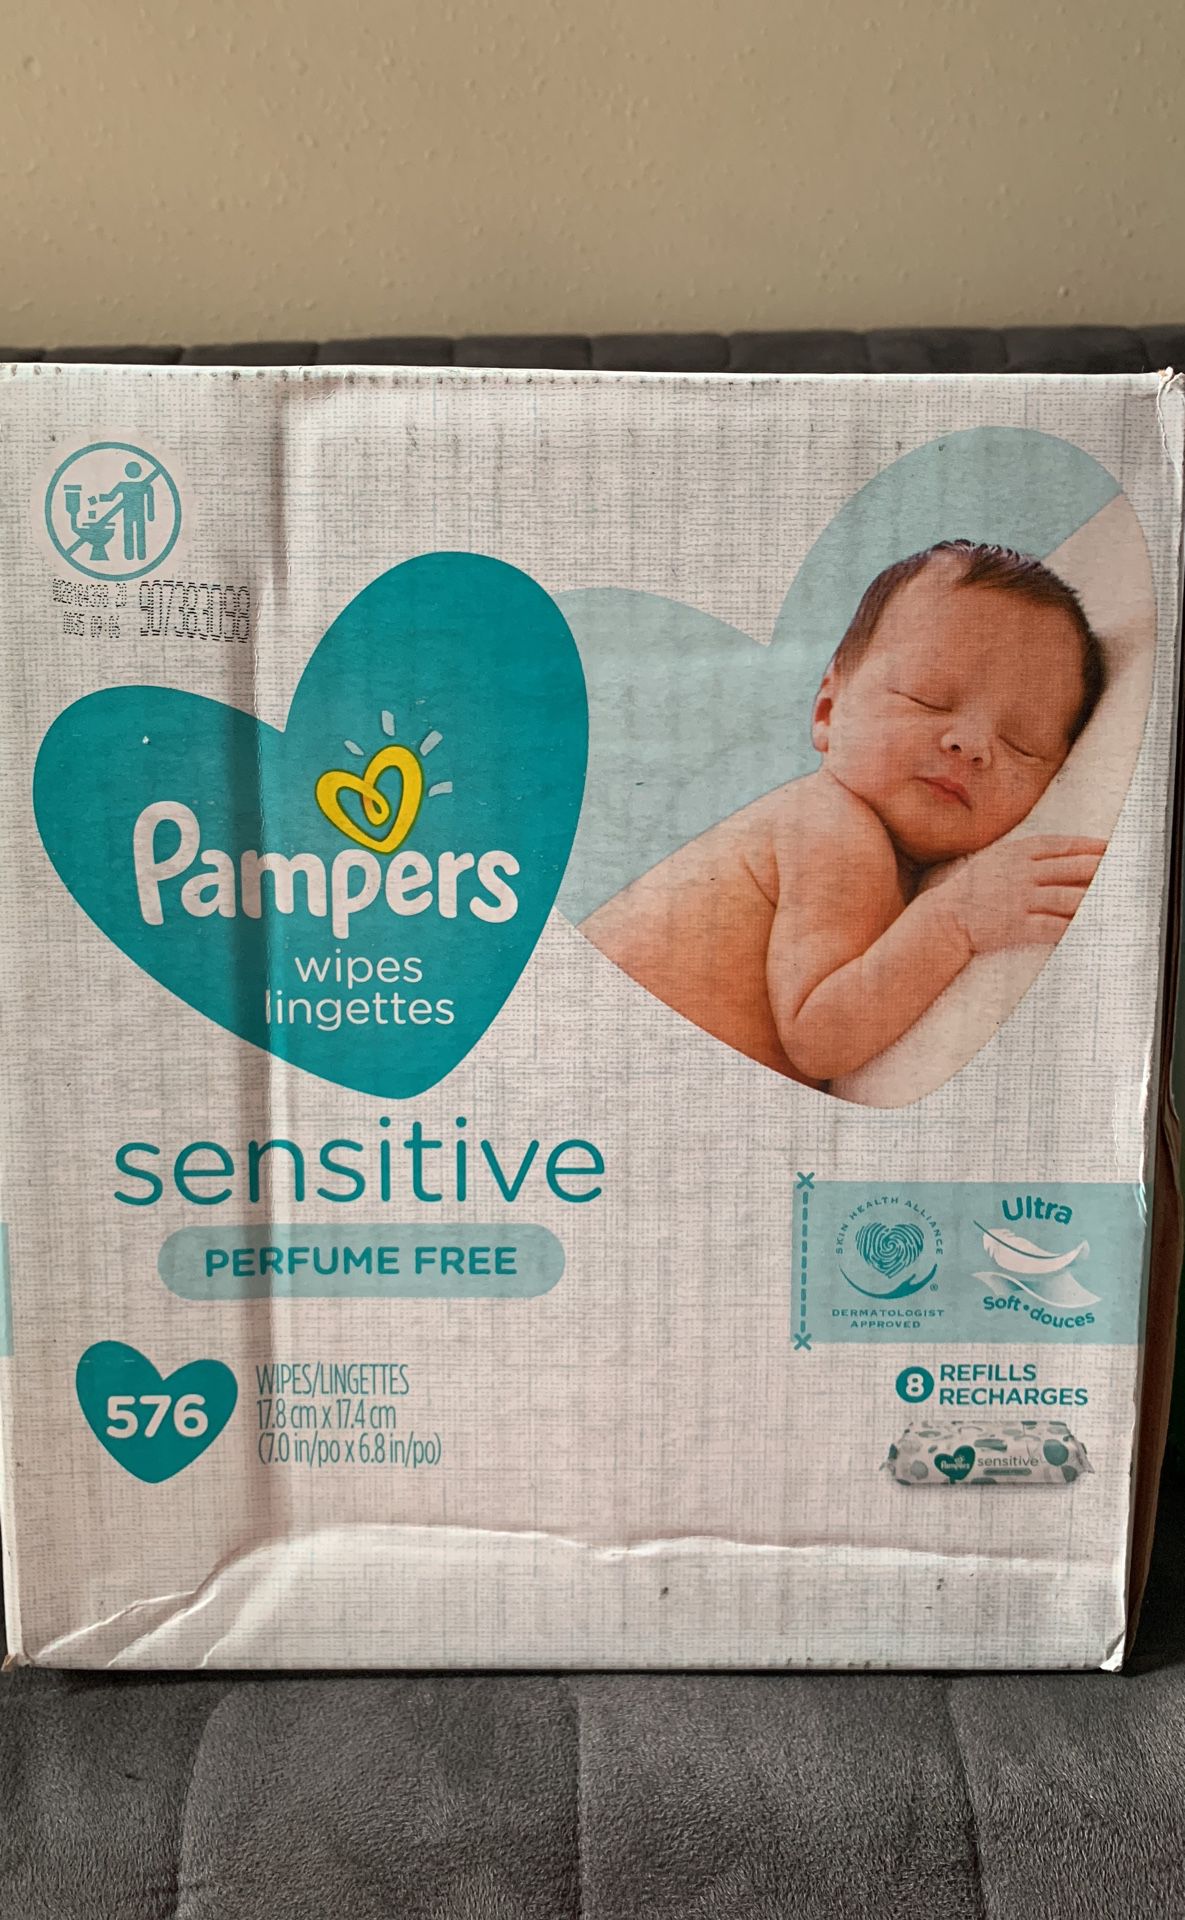 Pampers sensitive refill wipes in exchange